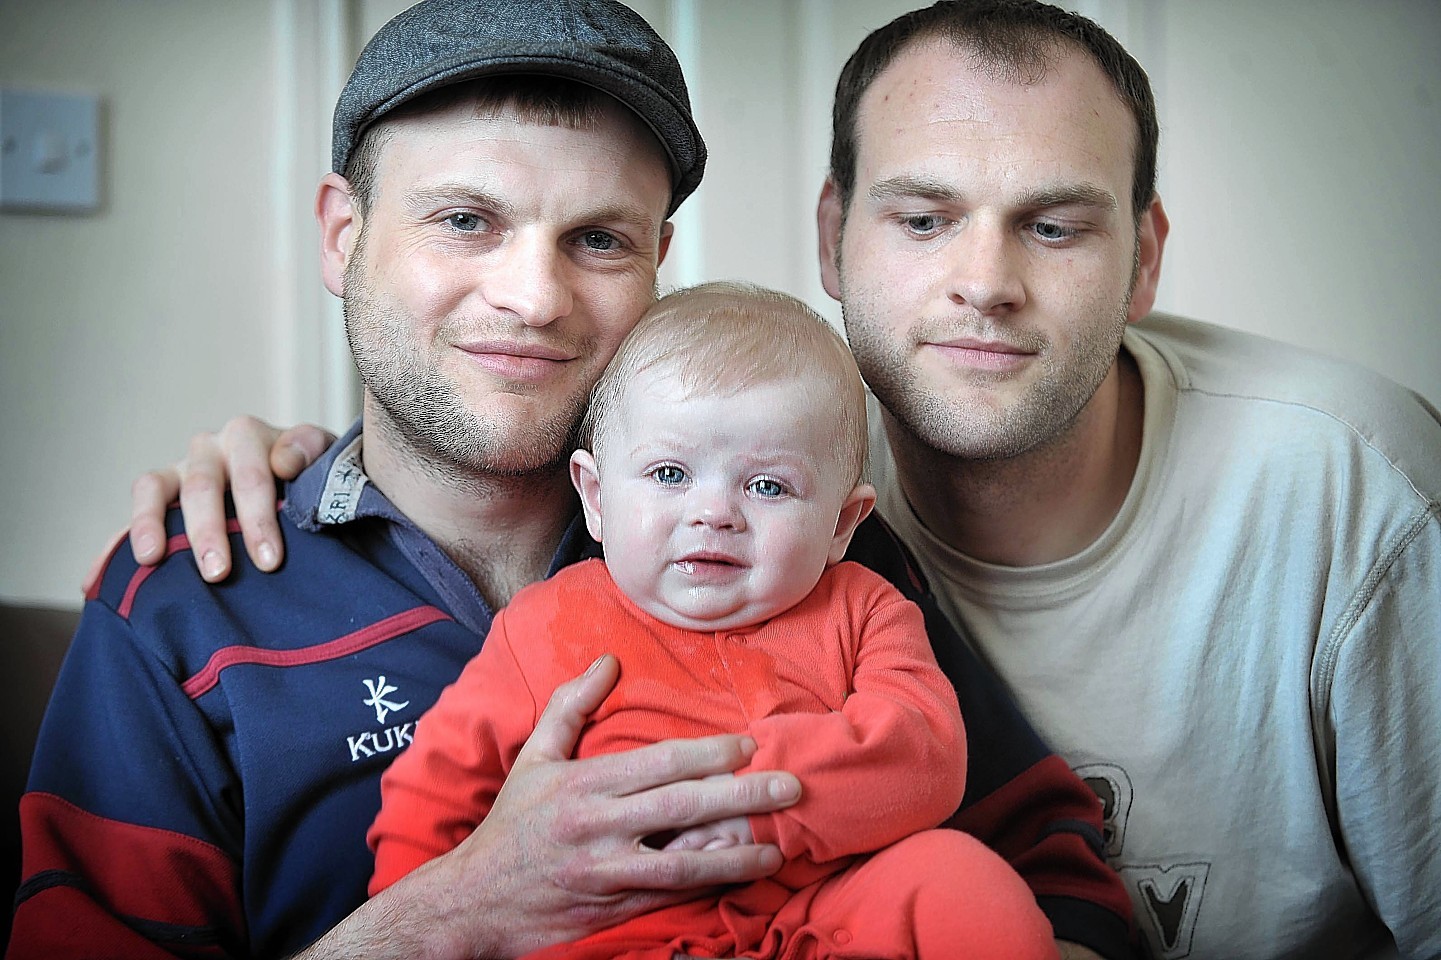 Ceri Lesley with his daughter and his brother on the right Nevan McFetrich.